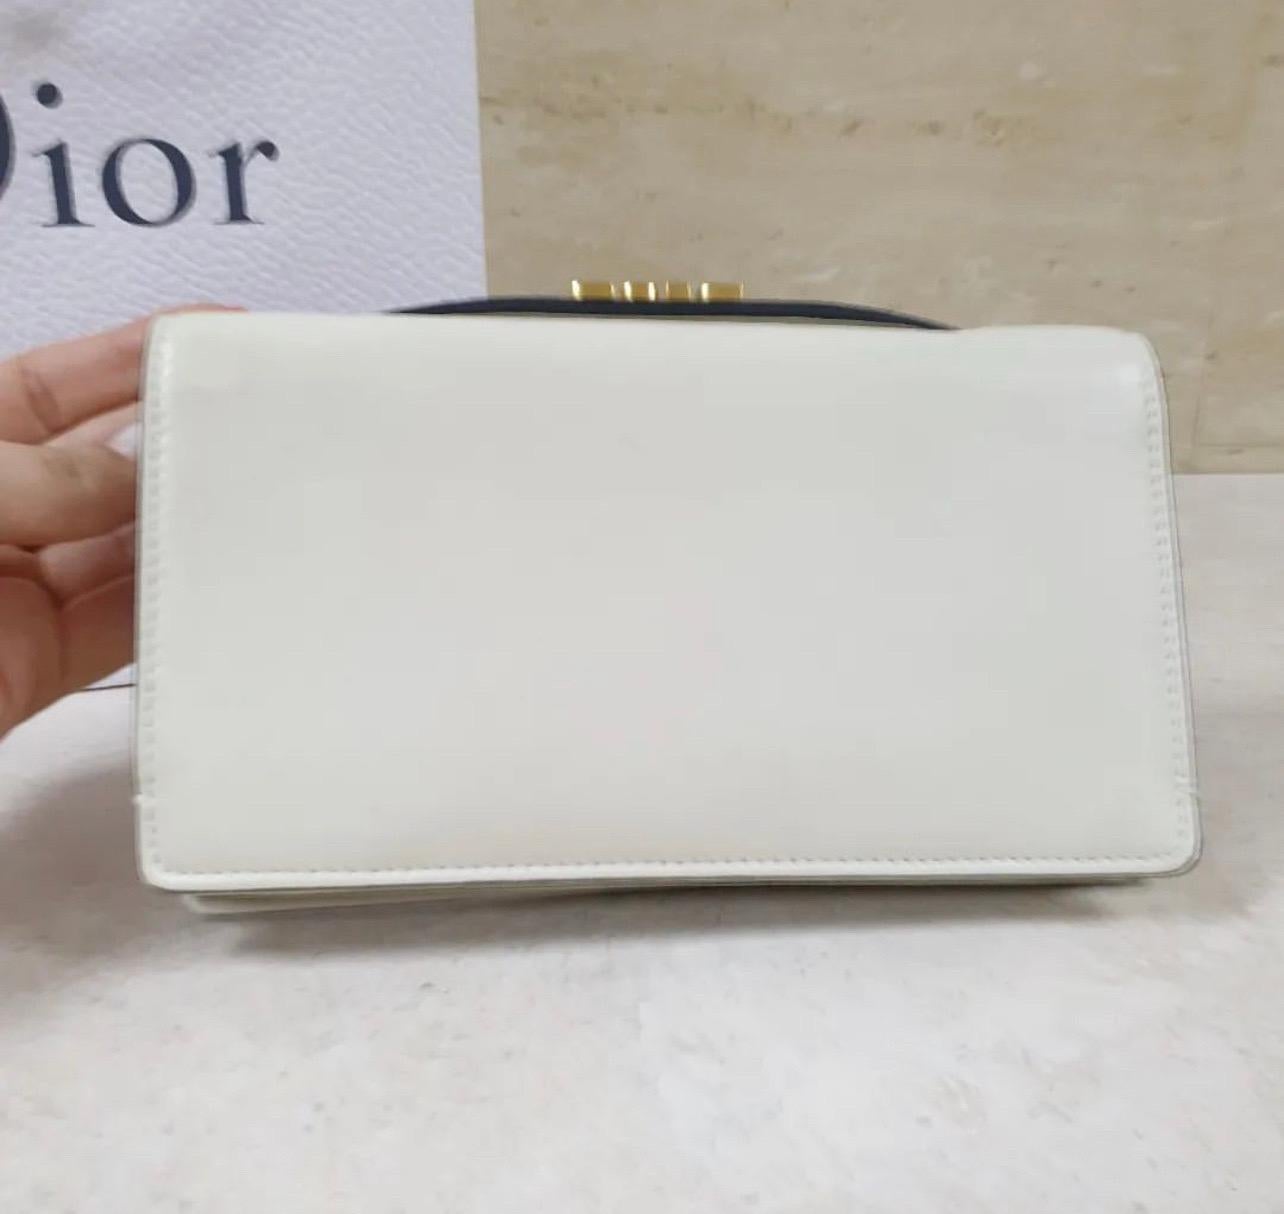 From the 2017 Collection. Ivory leather Christian Dior Tarot La Roue De La Fortune Clutch with gold-tone hardware, single flat top handle tonal interior, three interior compartments, single card slot and flap closure at front flap.

18.5*10.5
Good